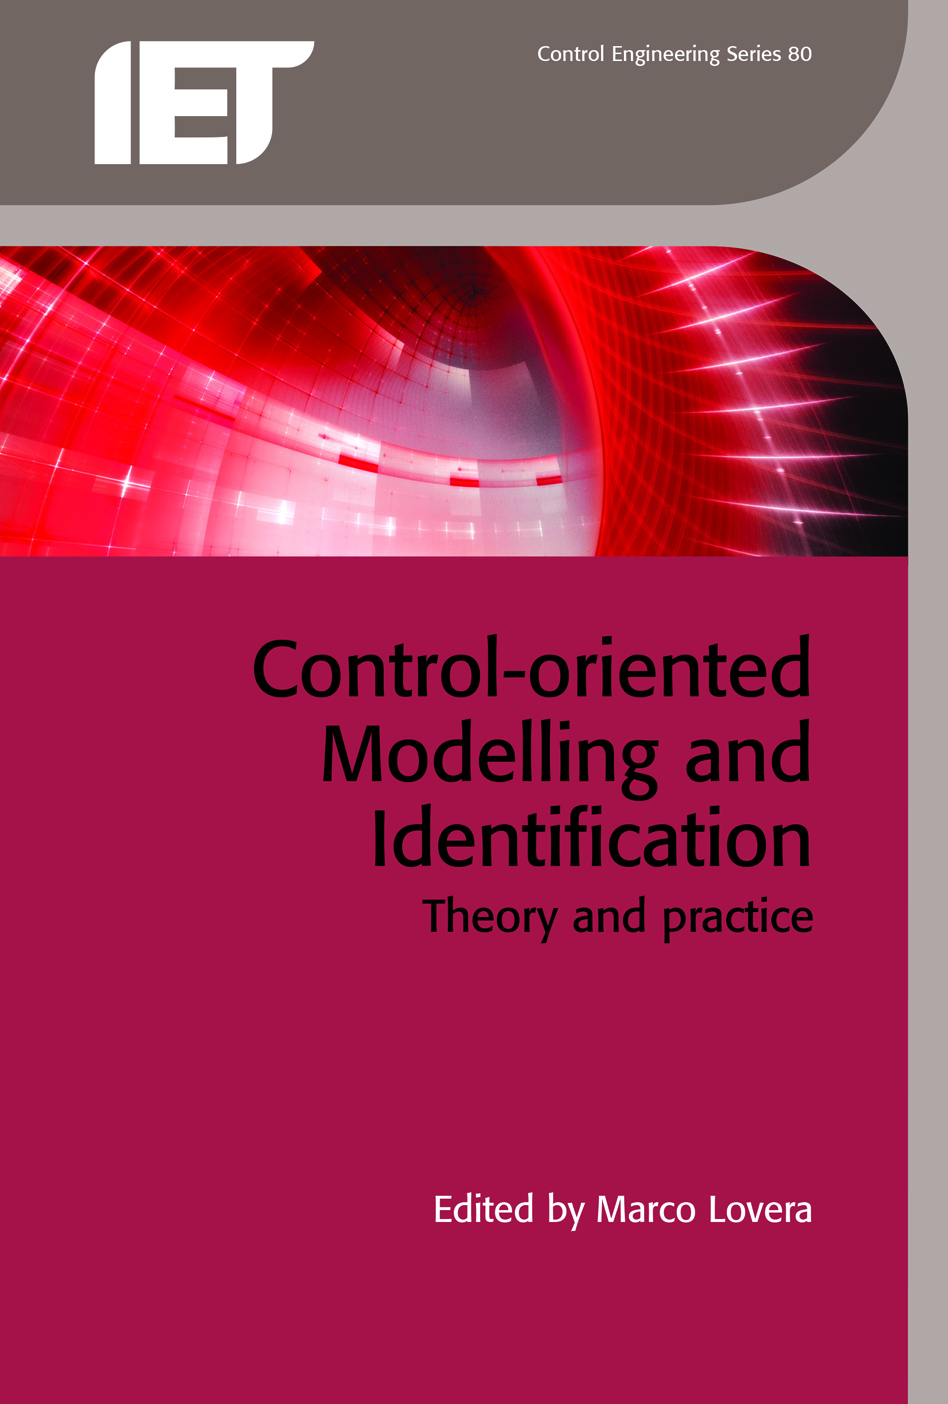 Control-oriented Modelling and Identification, Theory and practice